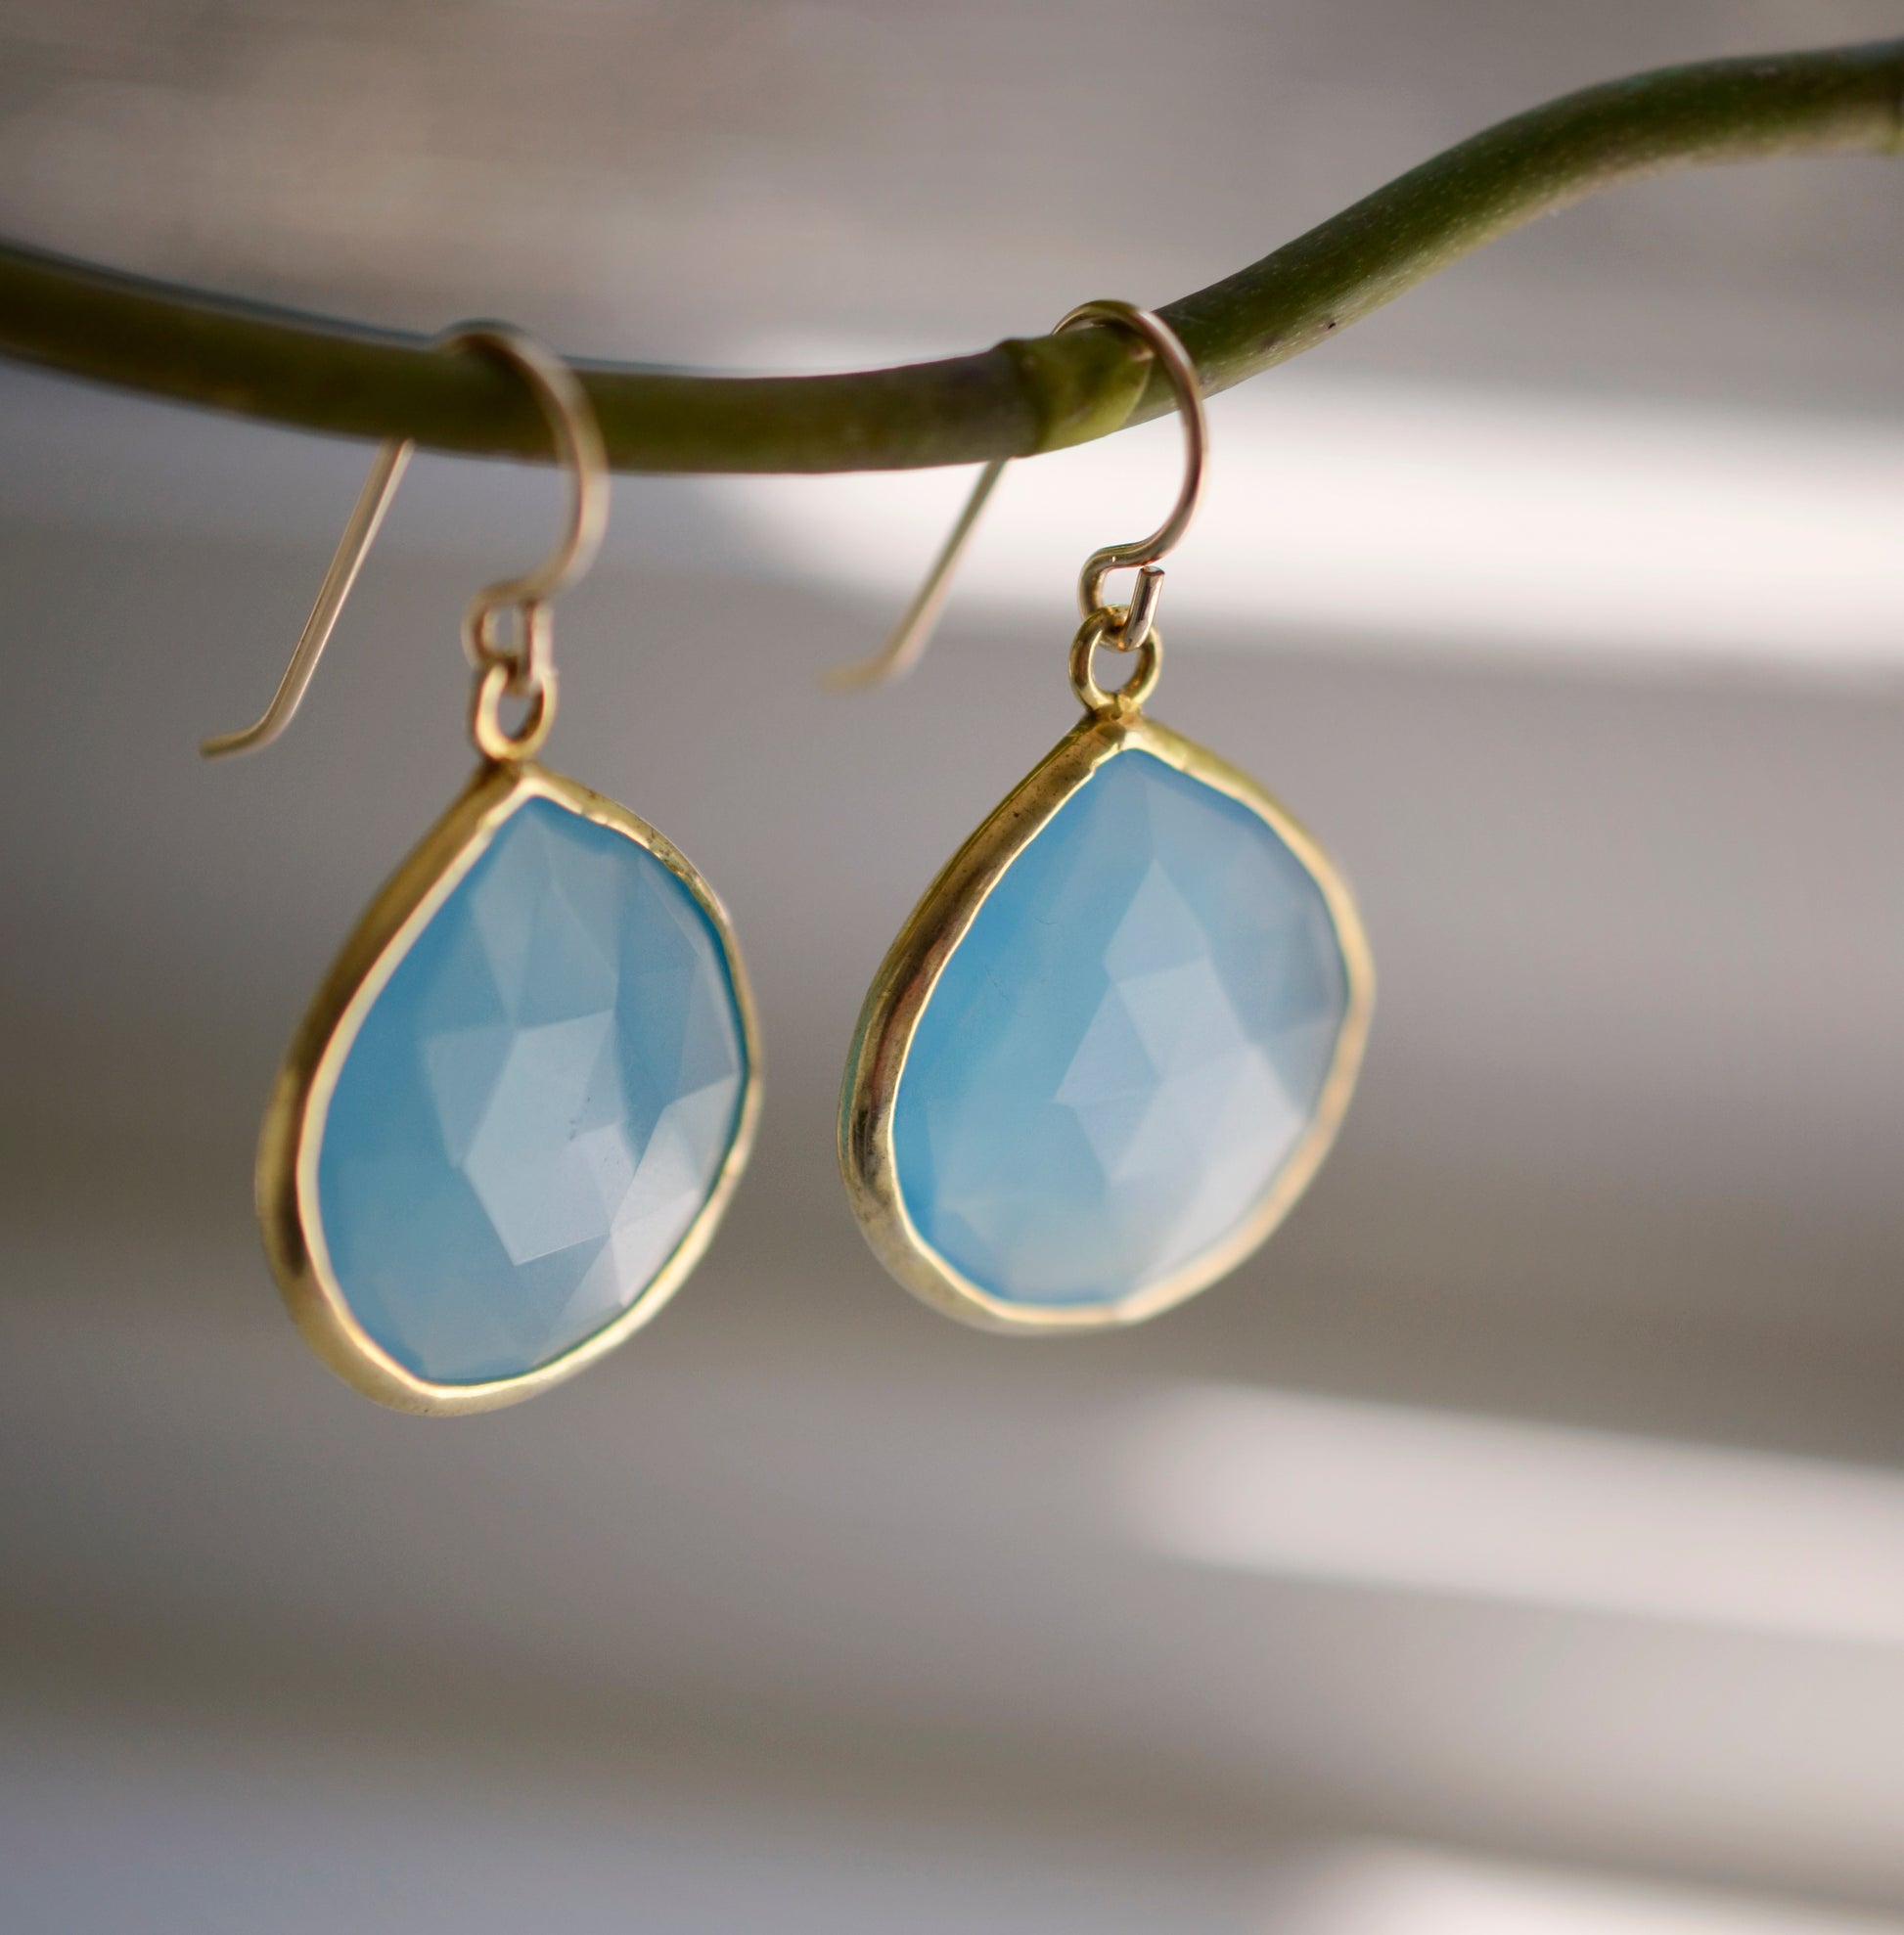 Large blue chalcedony teardrop gemstones bezeled in gold and suspended from earwires. Stones are faceted.